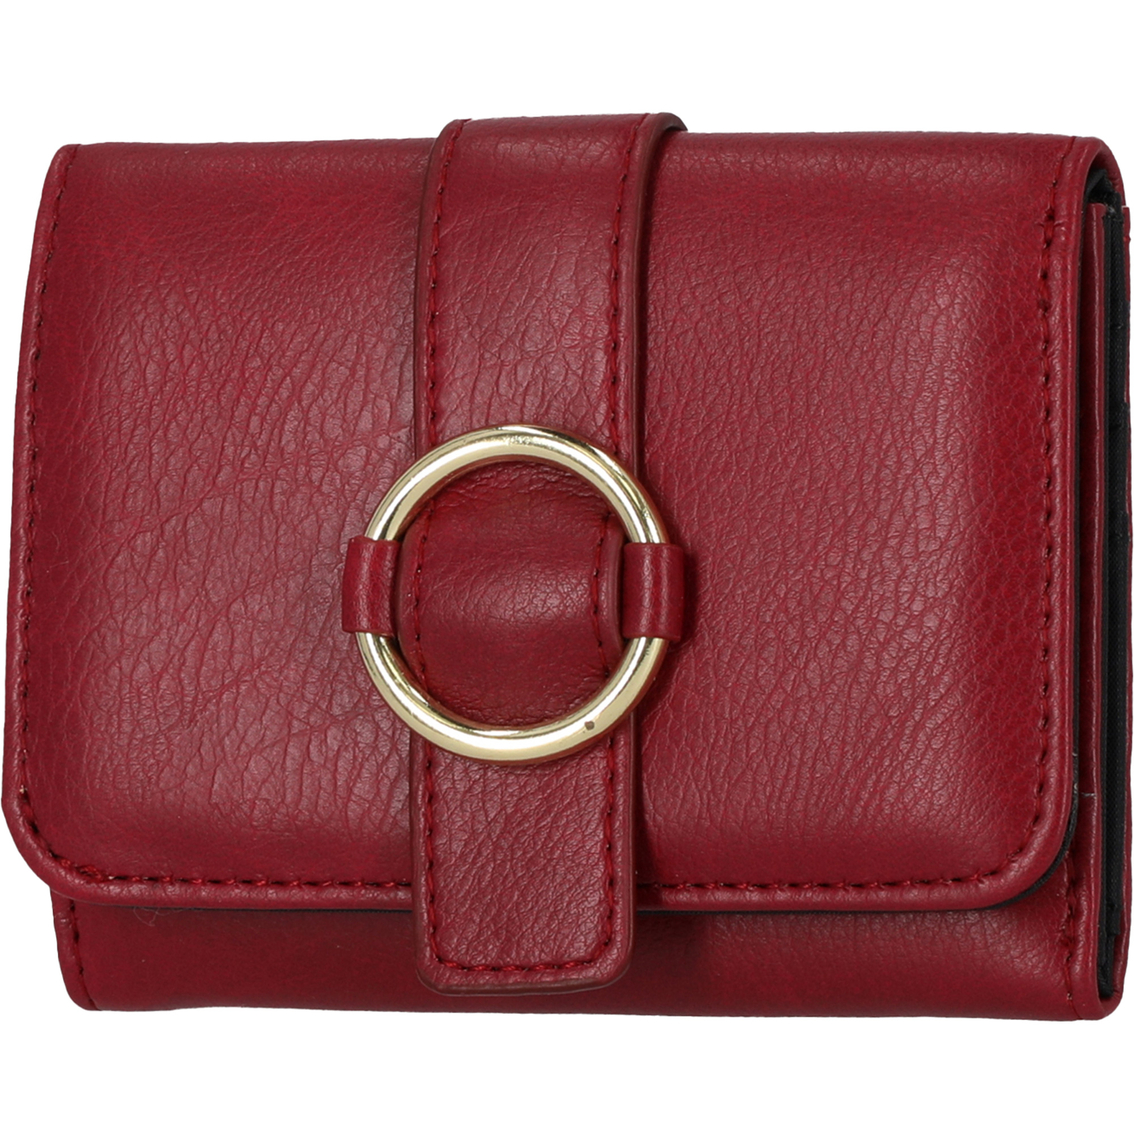 Mundi Anna Indexer With Center Ring Overlay | Wallets | Clothing ...